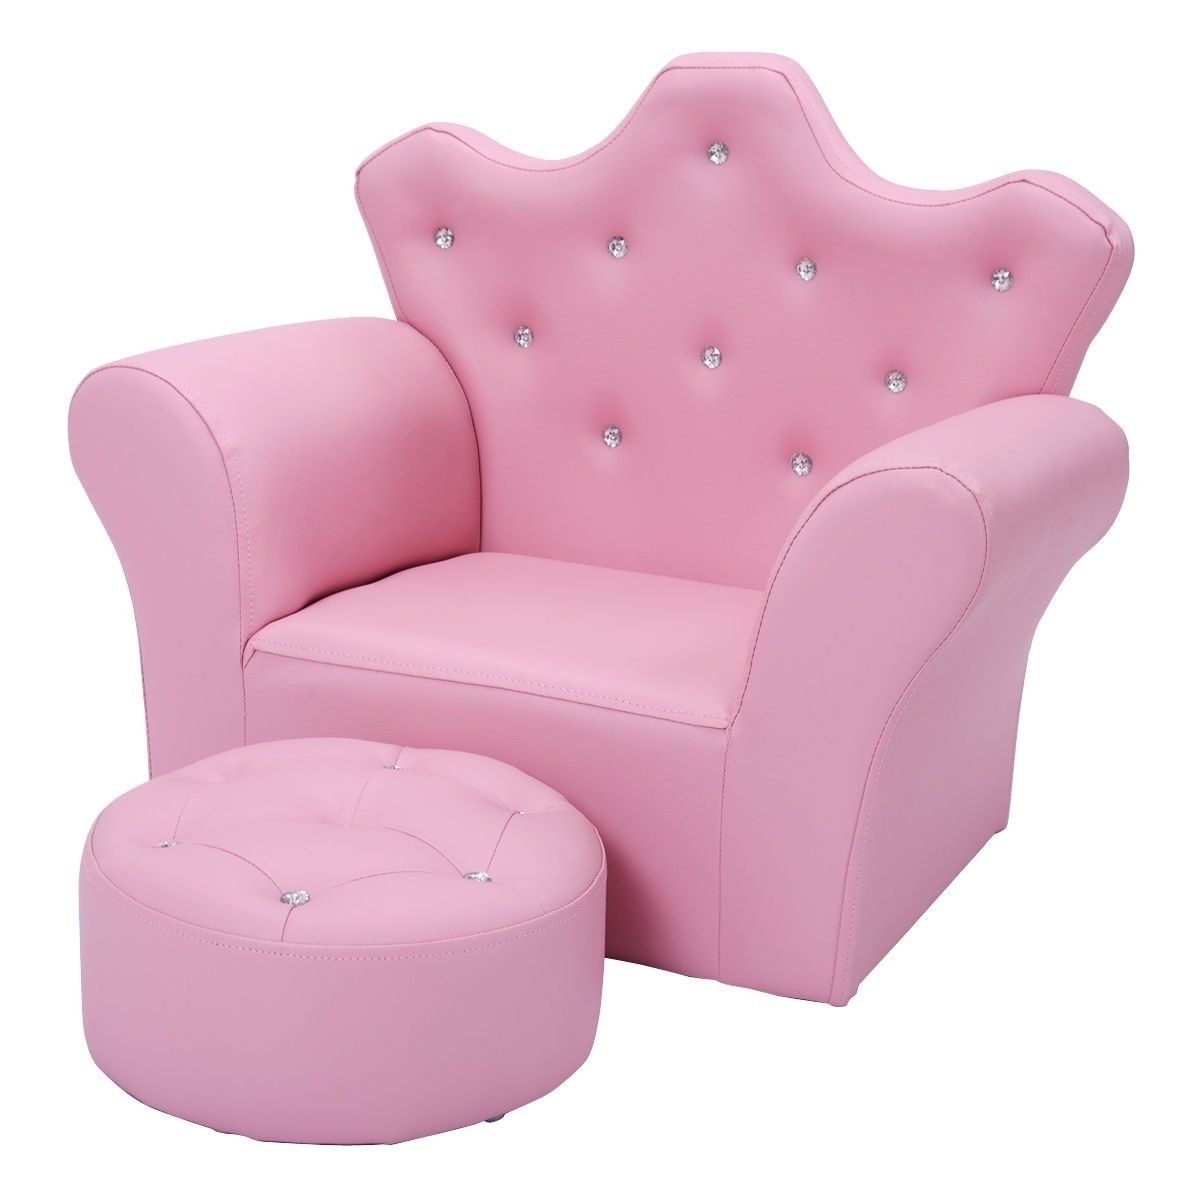 Fashionable Childrens Sofas With Amazon: Costzon Kids Sofa Chair With Ottoman Children (View 7 of 15)